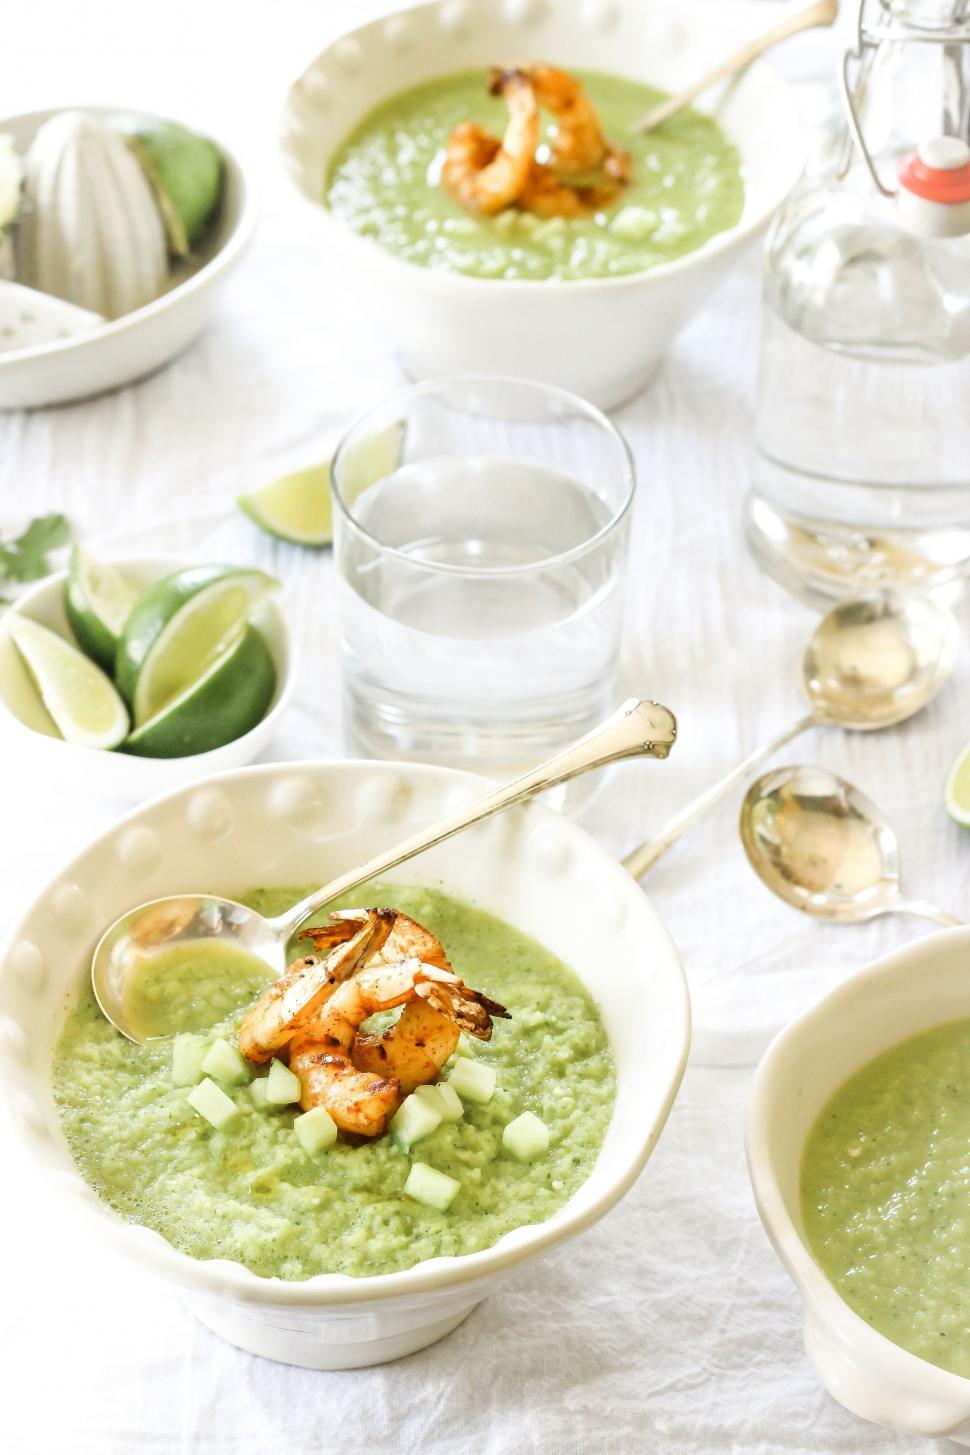 Free Image of Table With Bowls of Green Soup 